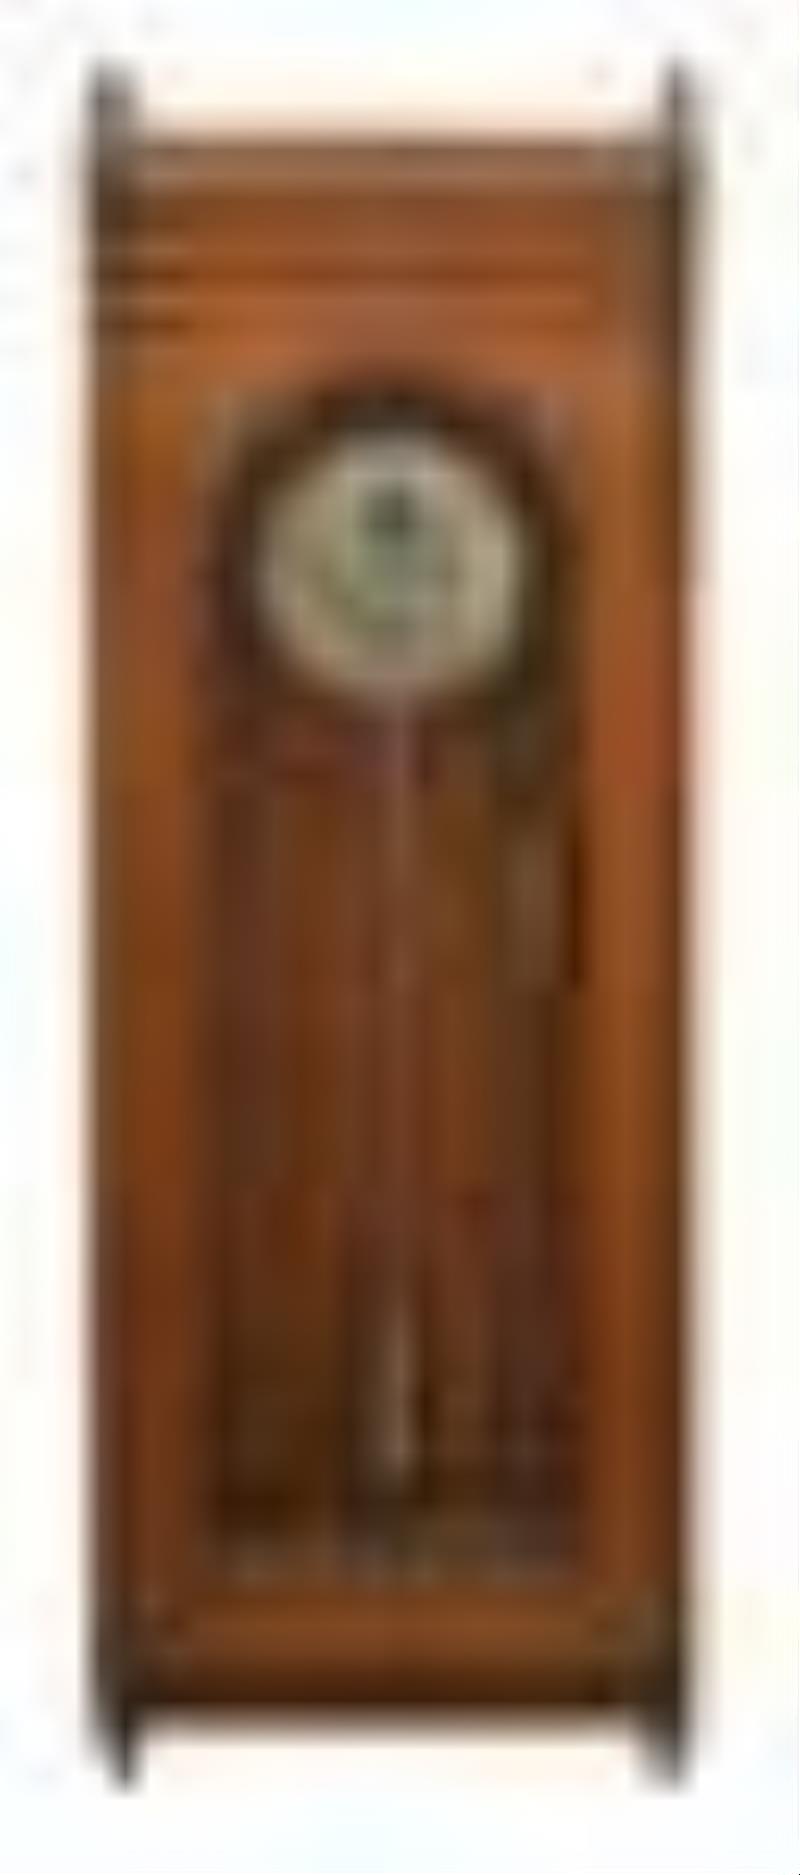 E. Howard & Co. No. 89 Wall Clock with Astronomical Dial